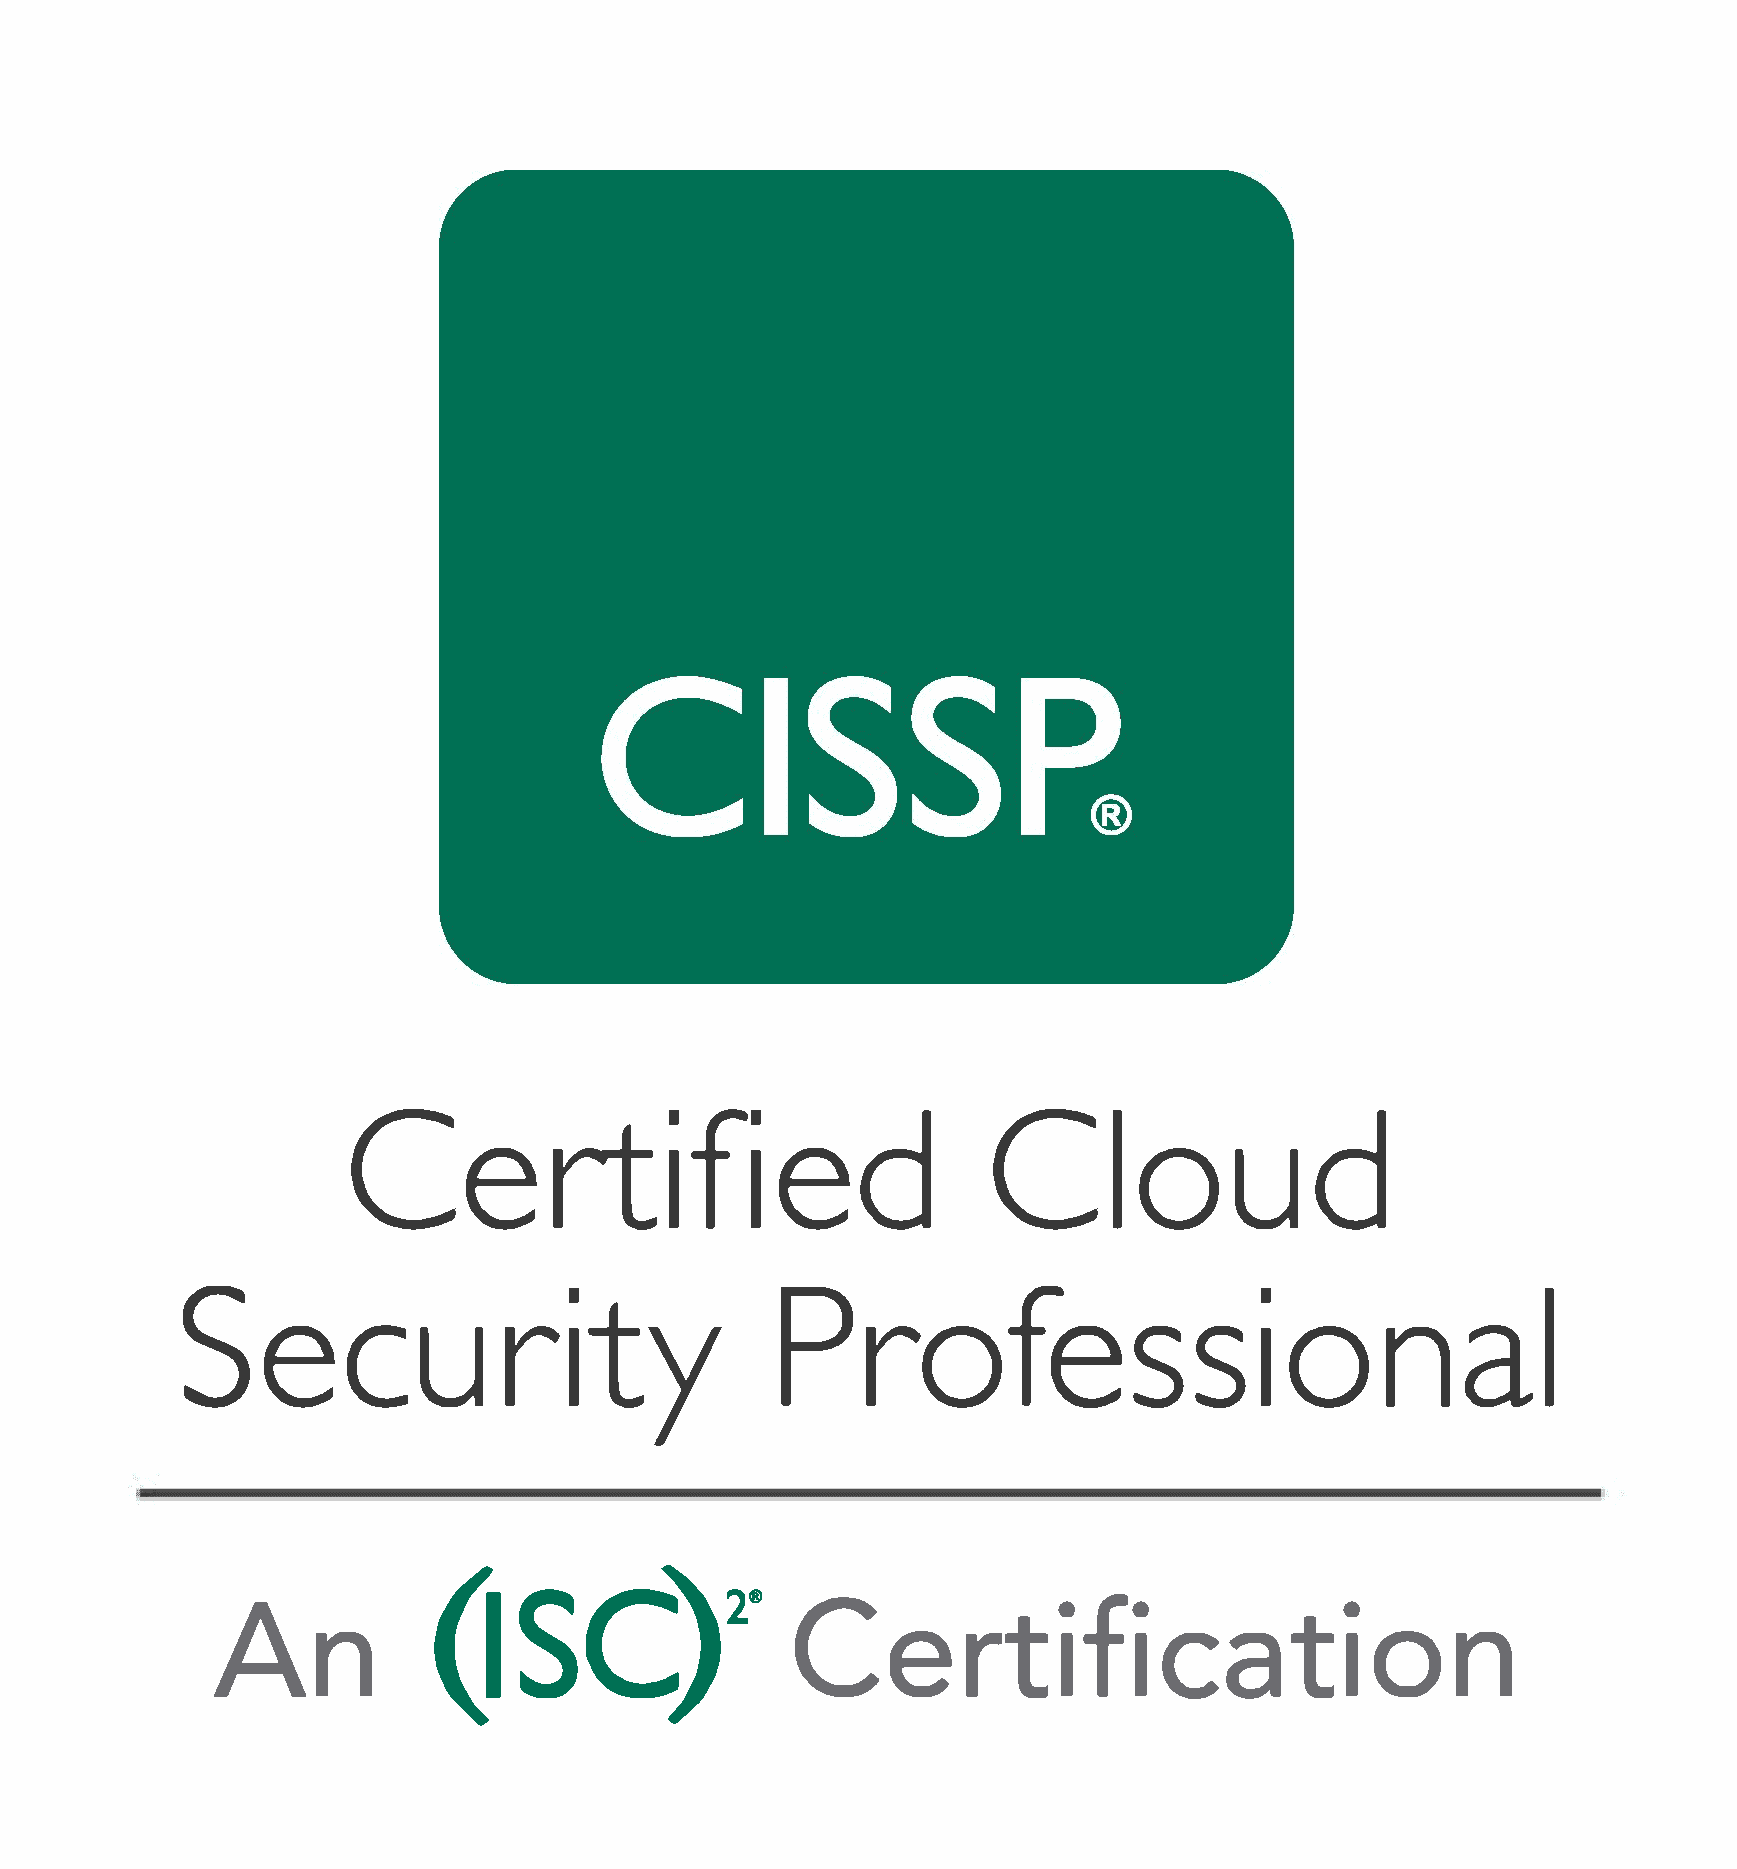 Certified Cloud Security Professional